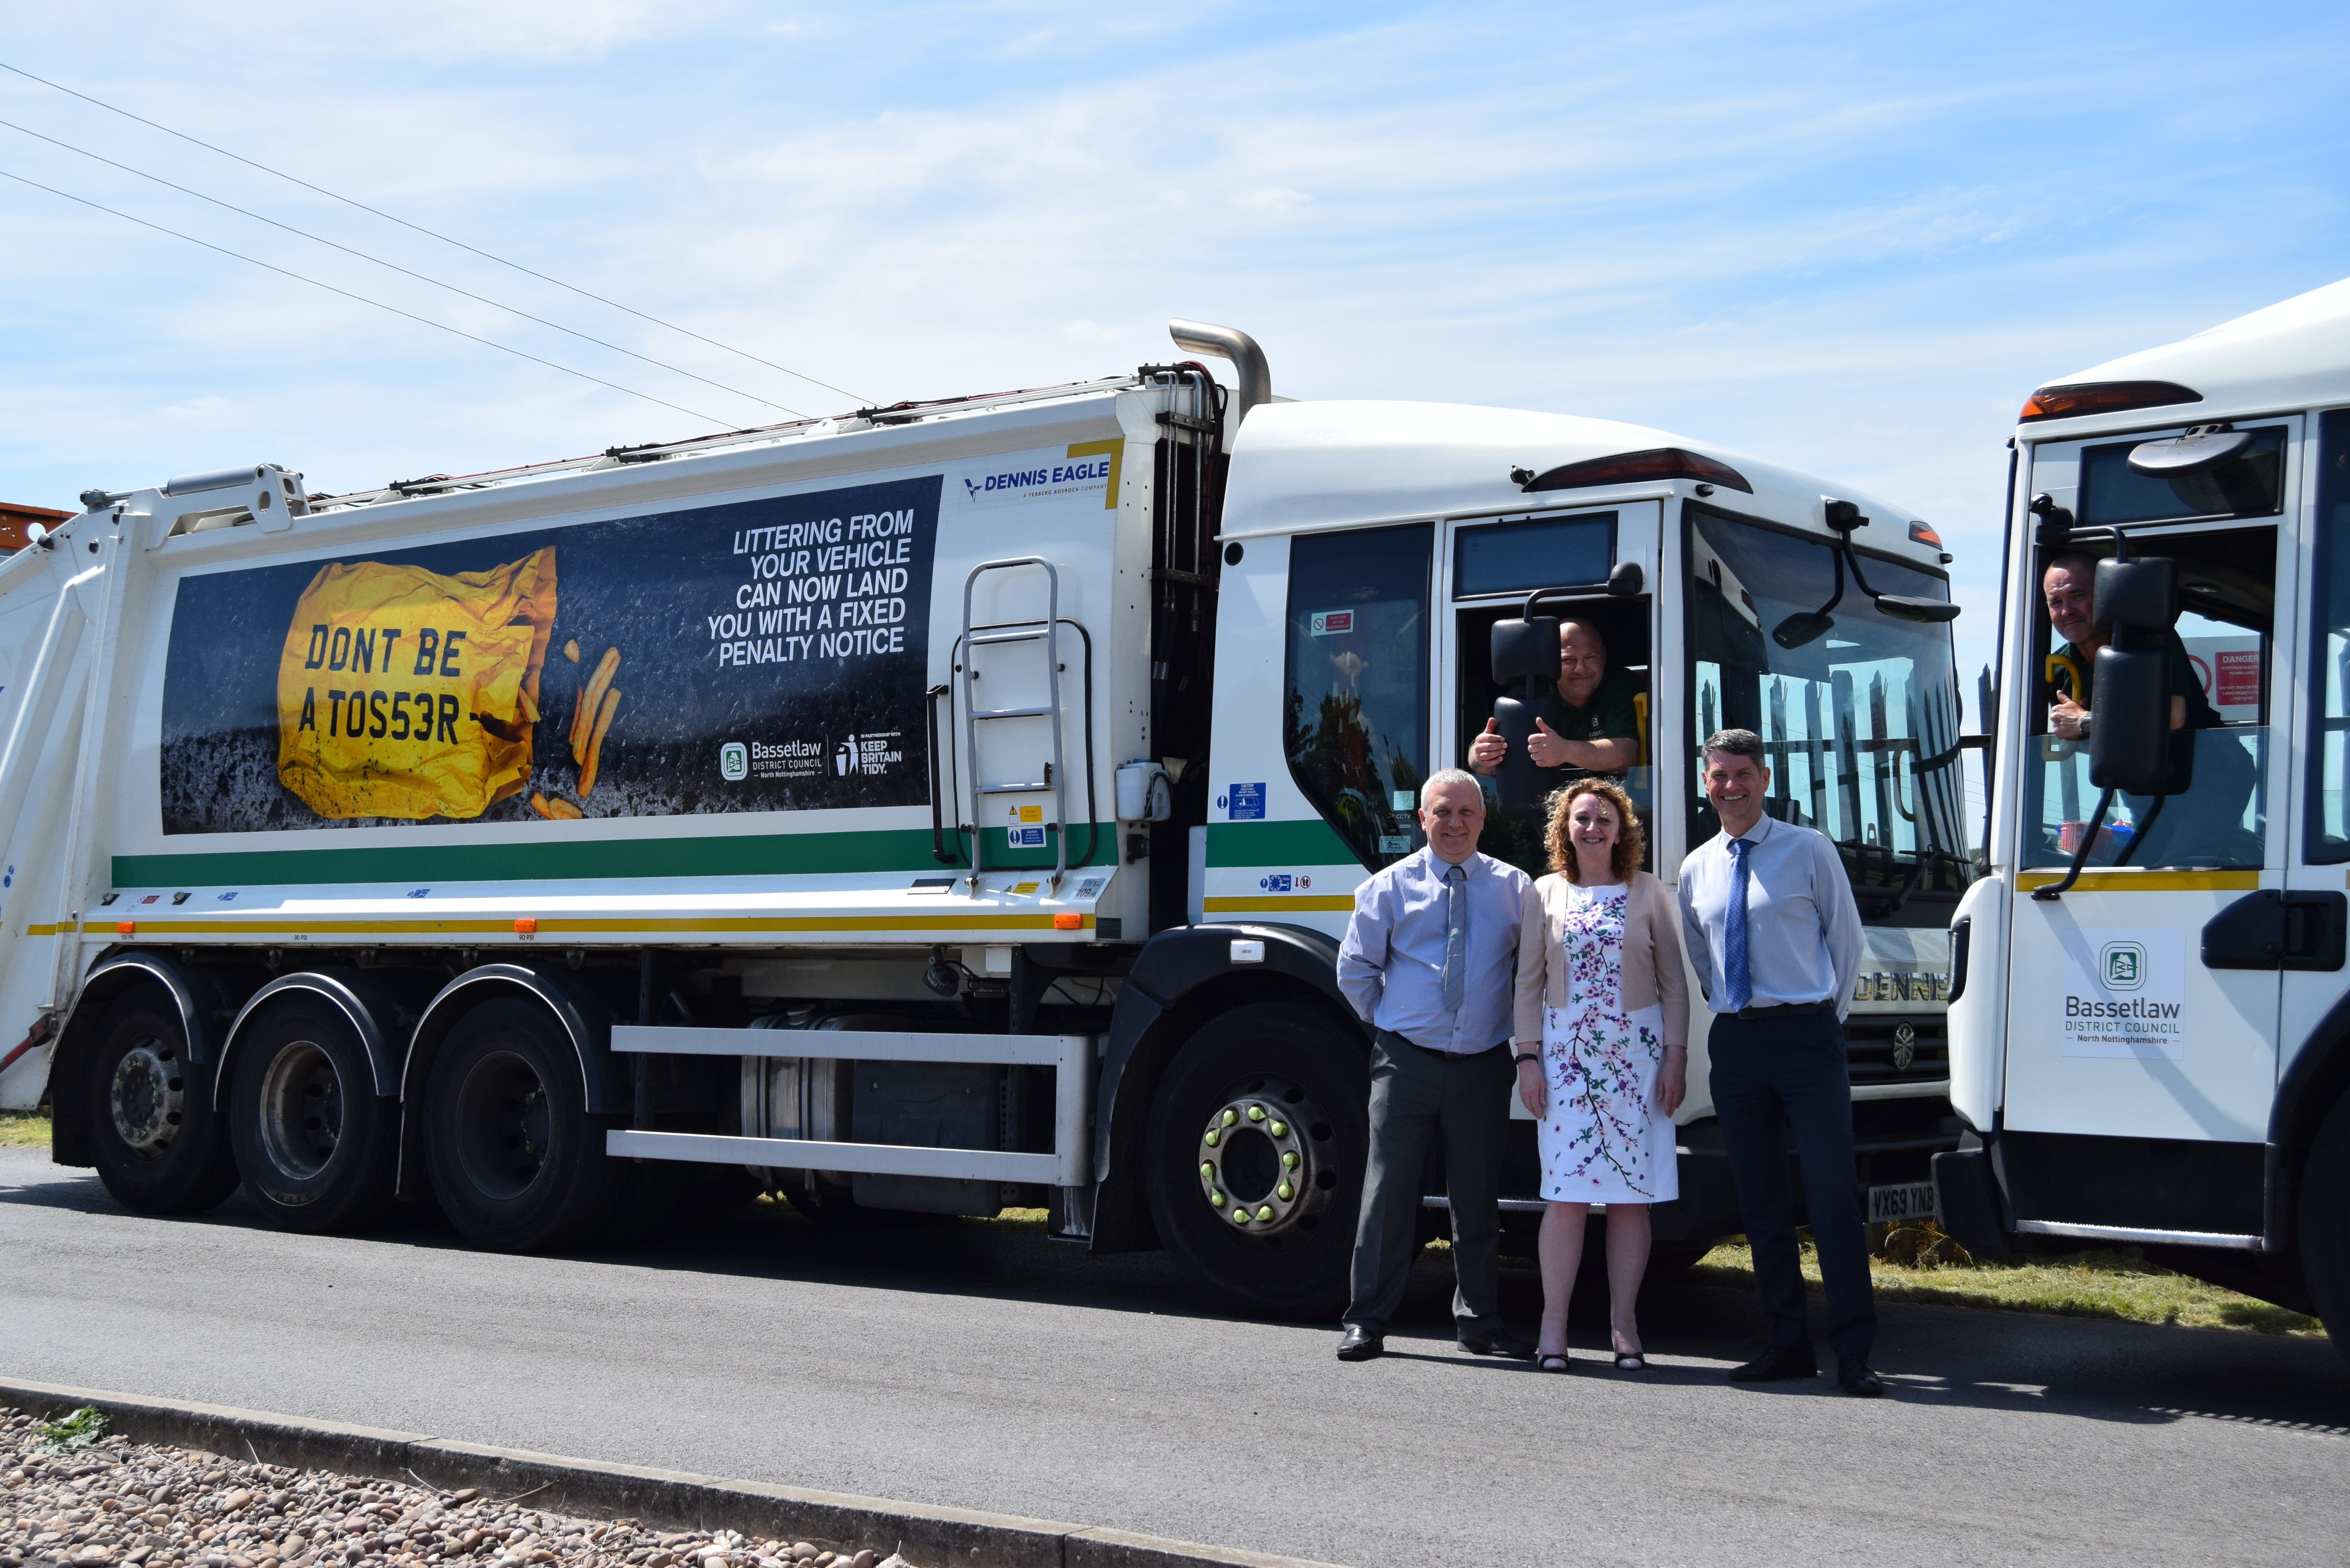 Council launches new anti-litter campaign – ‘Don’t be a Tos53r’